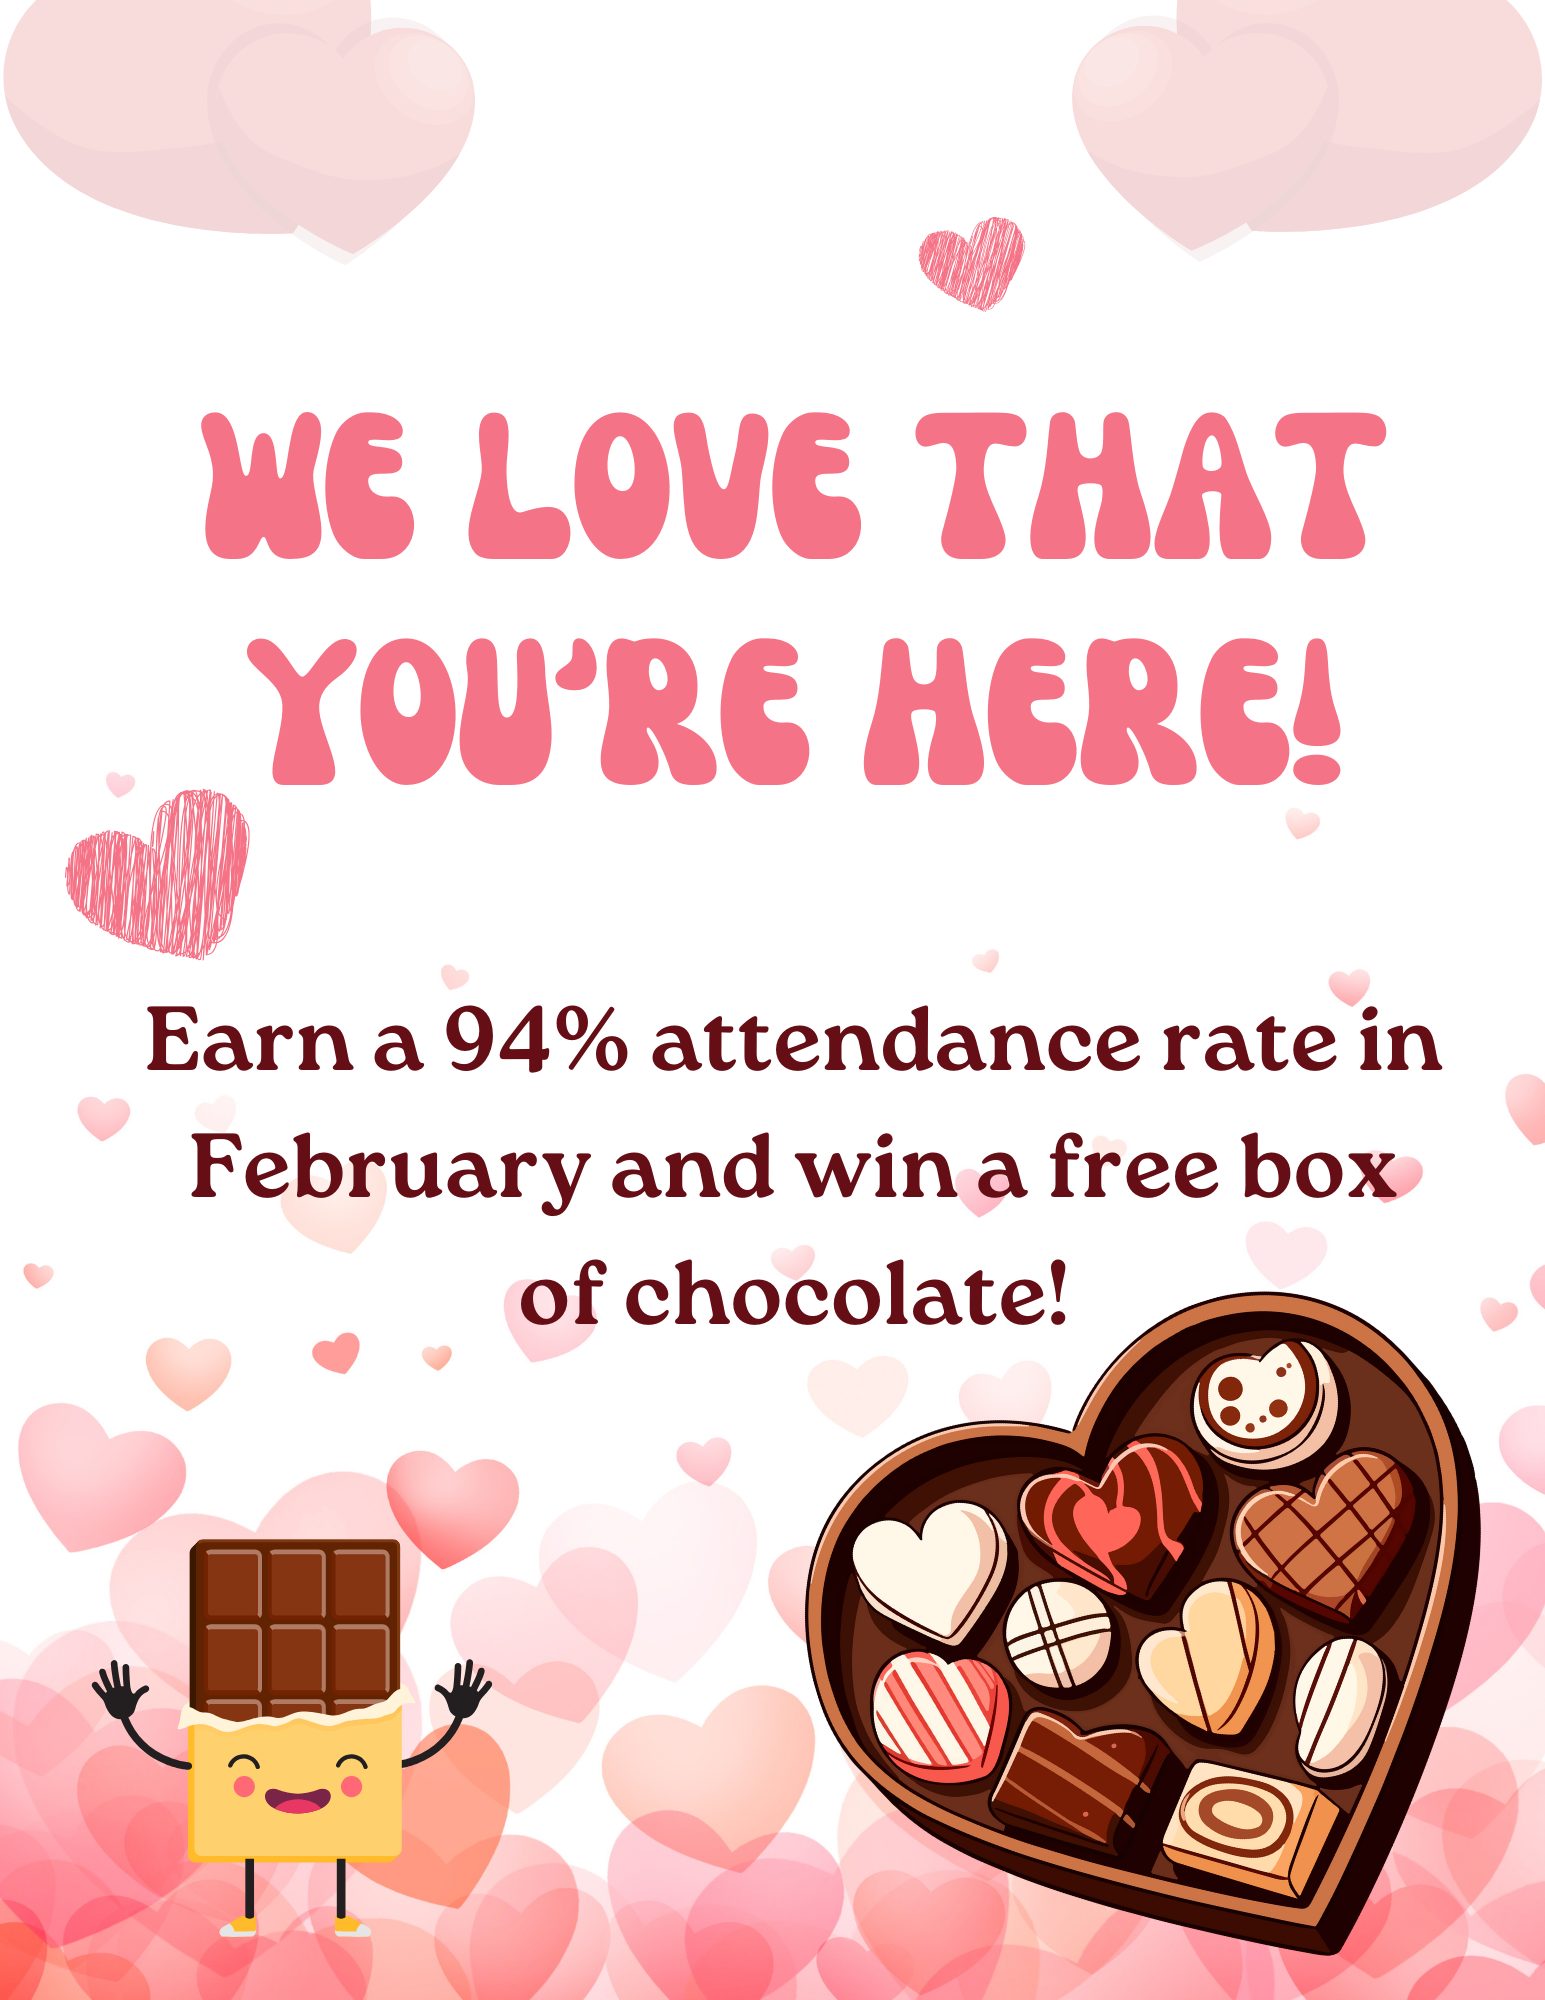 We love that youre here. Earn 94% attendance rate in Feb and win a free box of chocolate!